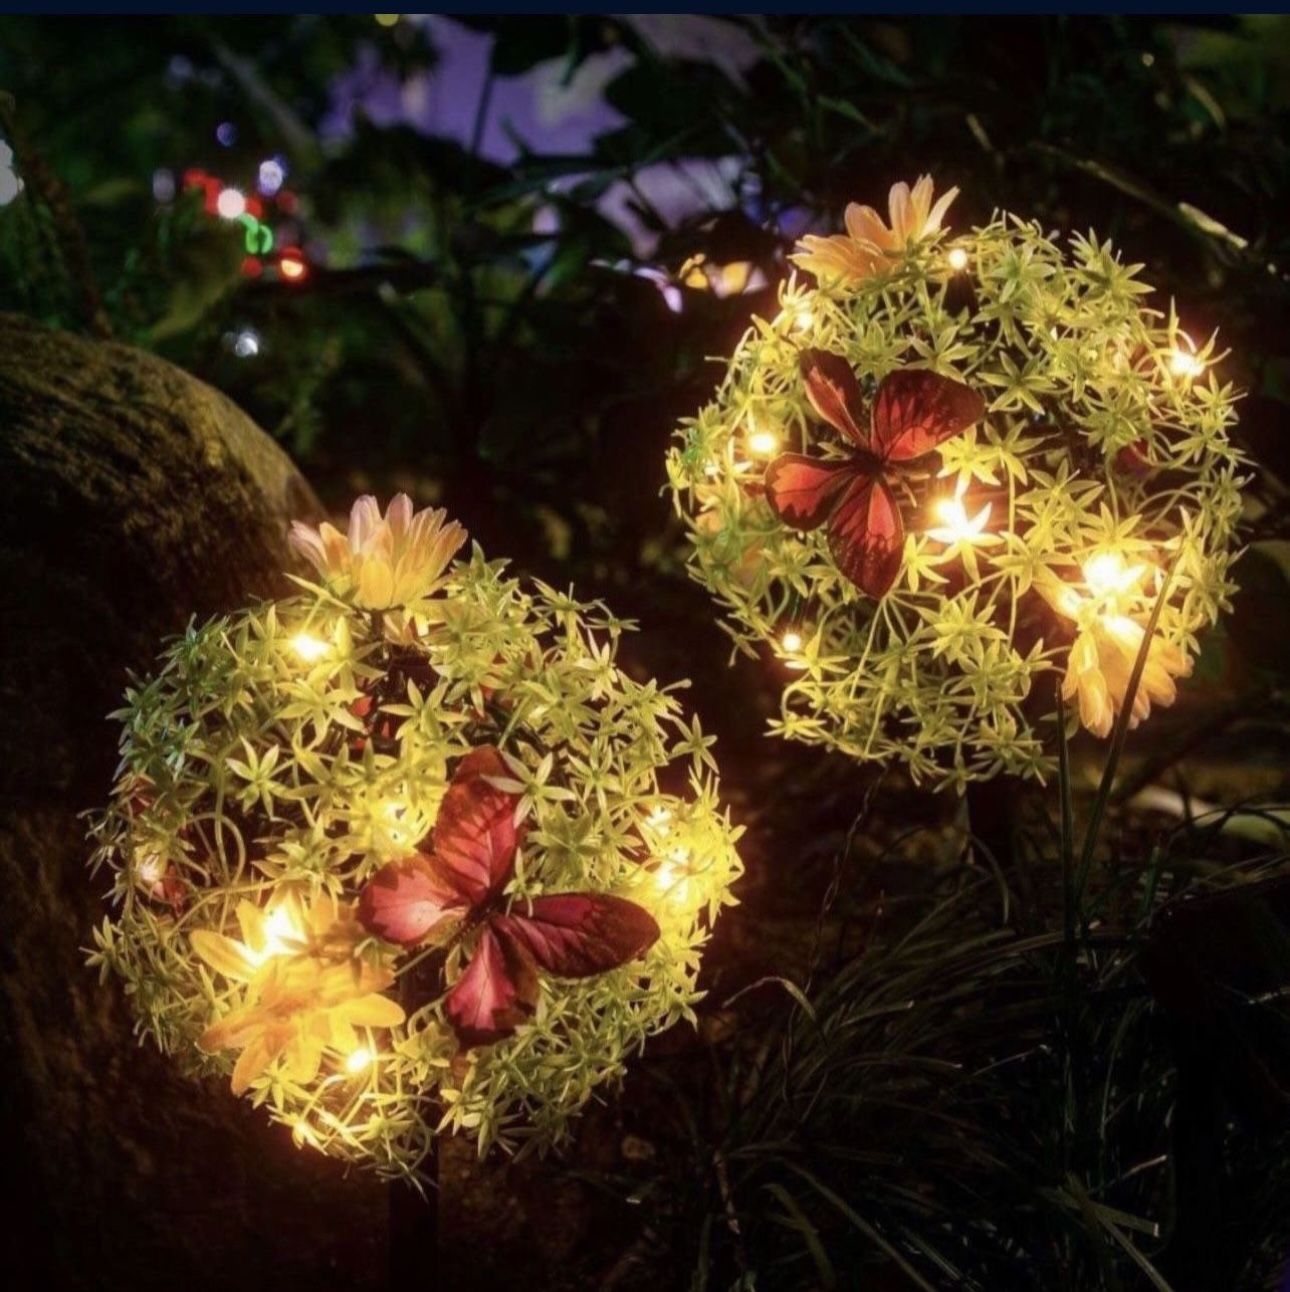 NENRENT 2 Pack Outdoor Solar Garden Flower Lights with Butterfly Lantern,Multi-Color Waterproof Decoration led lamp for Home Garden Patio Yard&Pathway